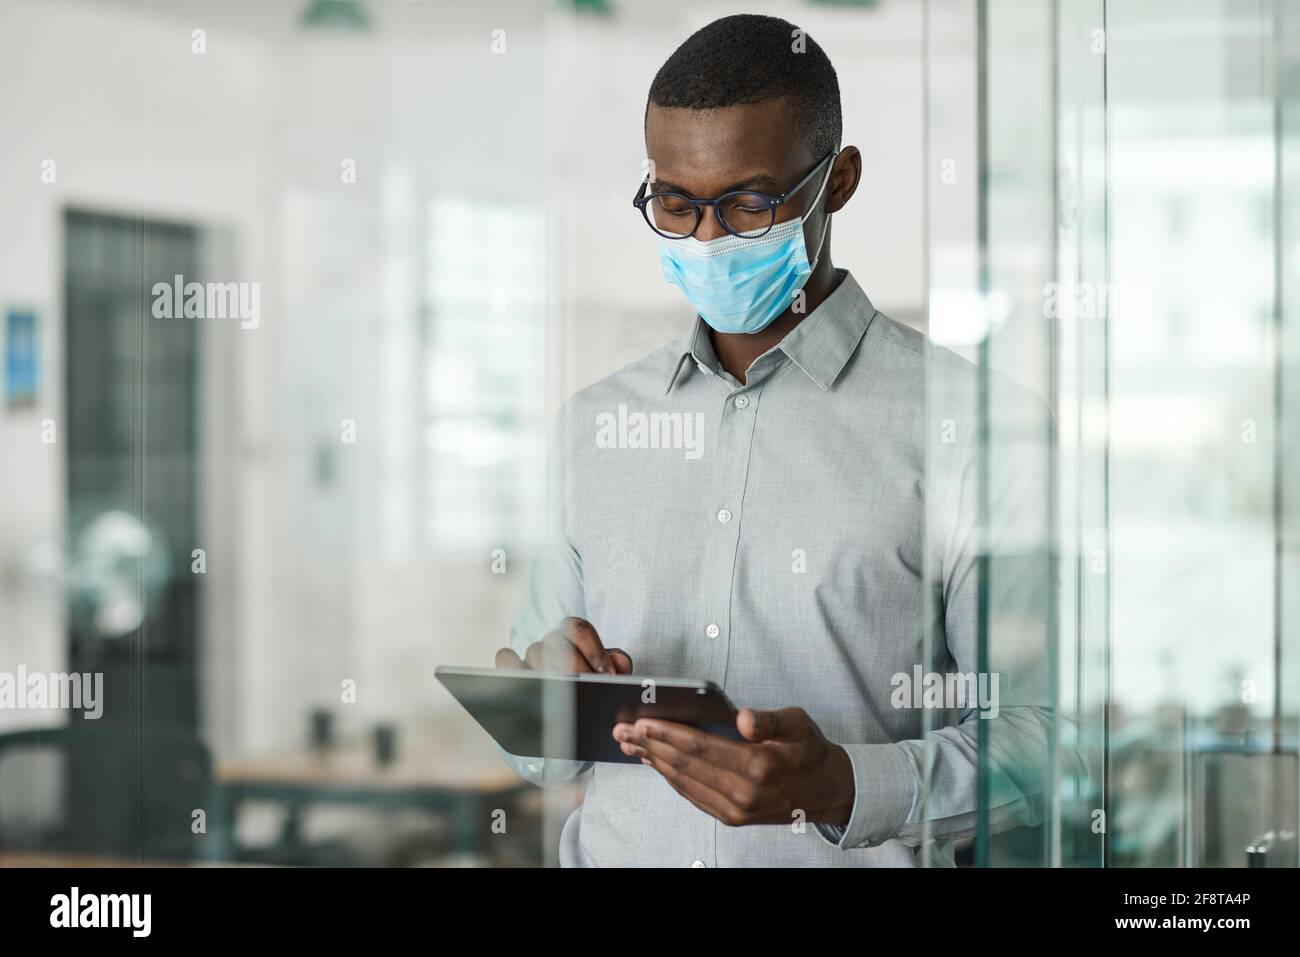 African businessman in a face mask using a tablet at work Stock Photo